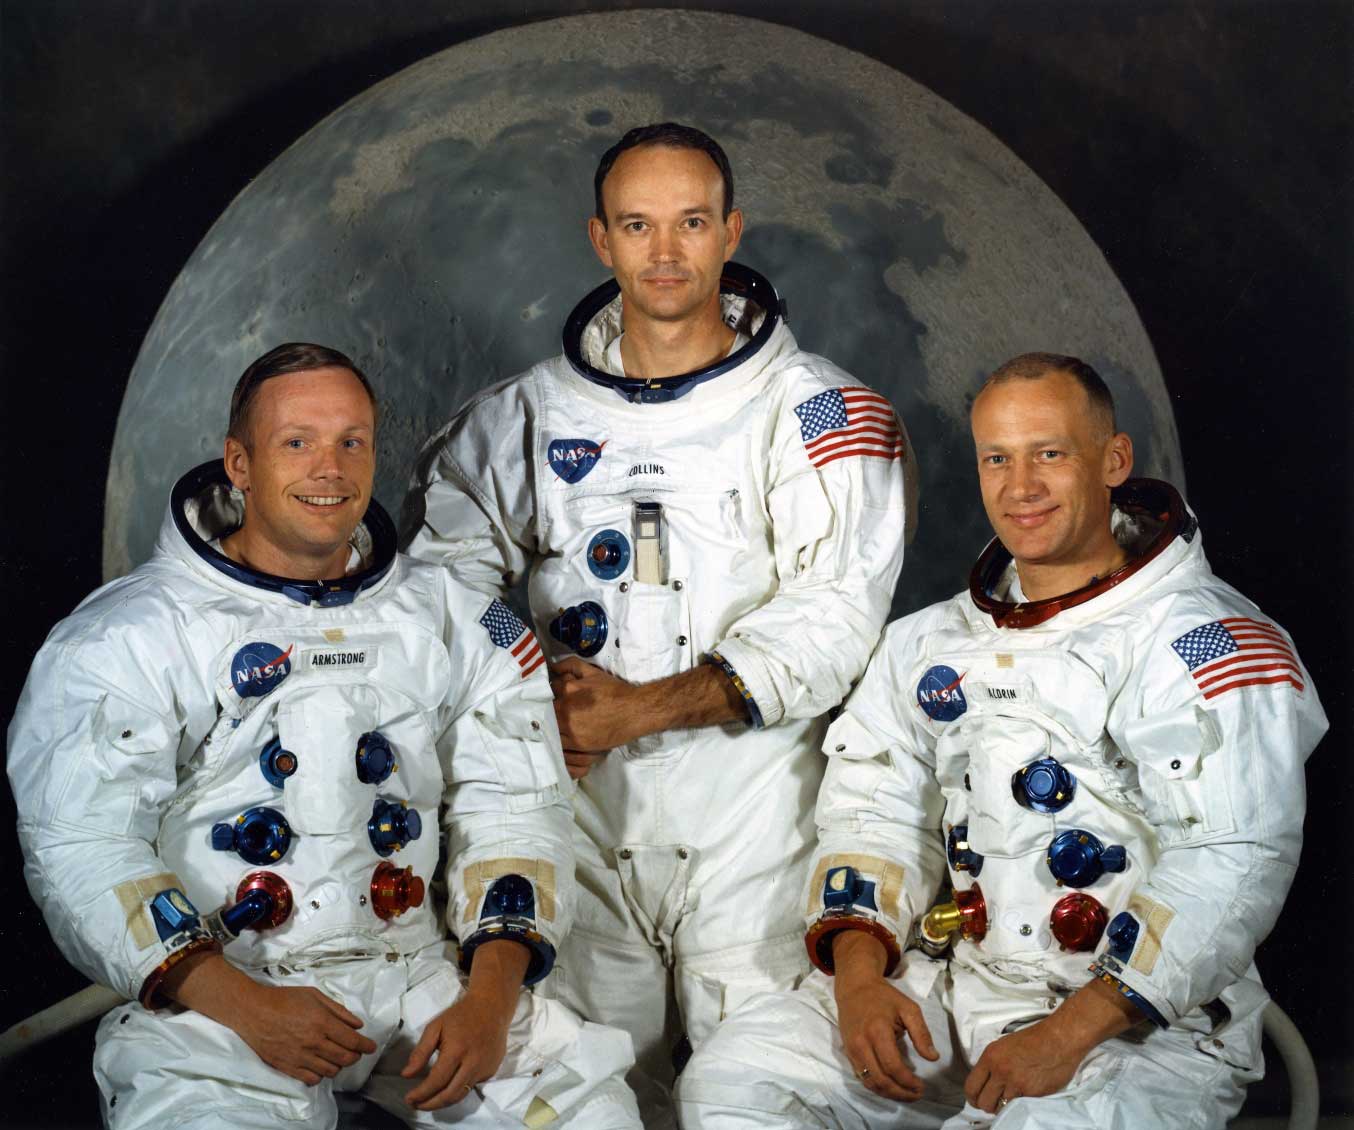 The Apollo 11 mission consisted of Commander Neil Armstrong, Command Module Pilot Michael Collins and Lunar Module Pilot, Buzz Aldrin. All three of the crew members had been on a previous space flight, making this only the 2nd all-veteran crew in spaceflight history.